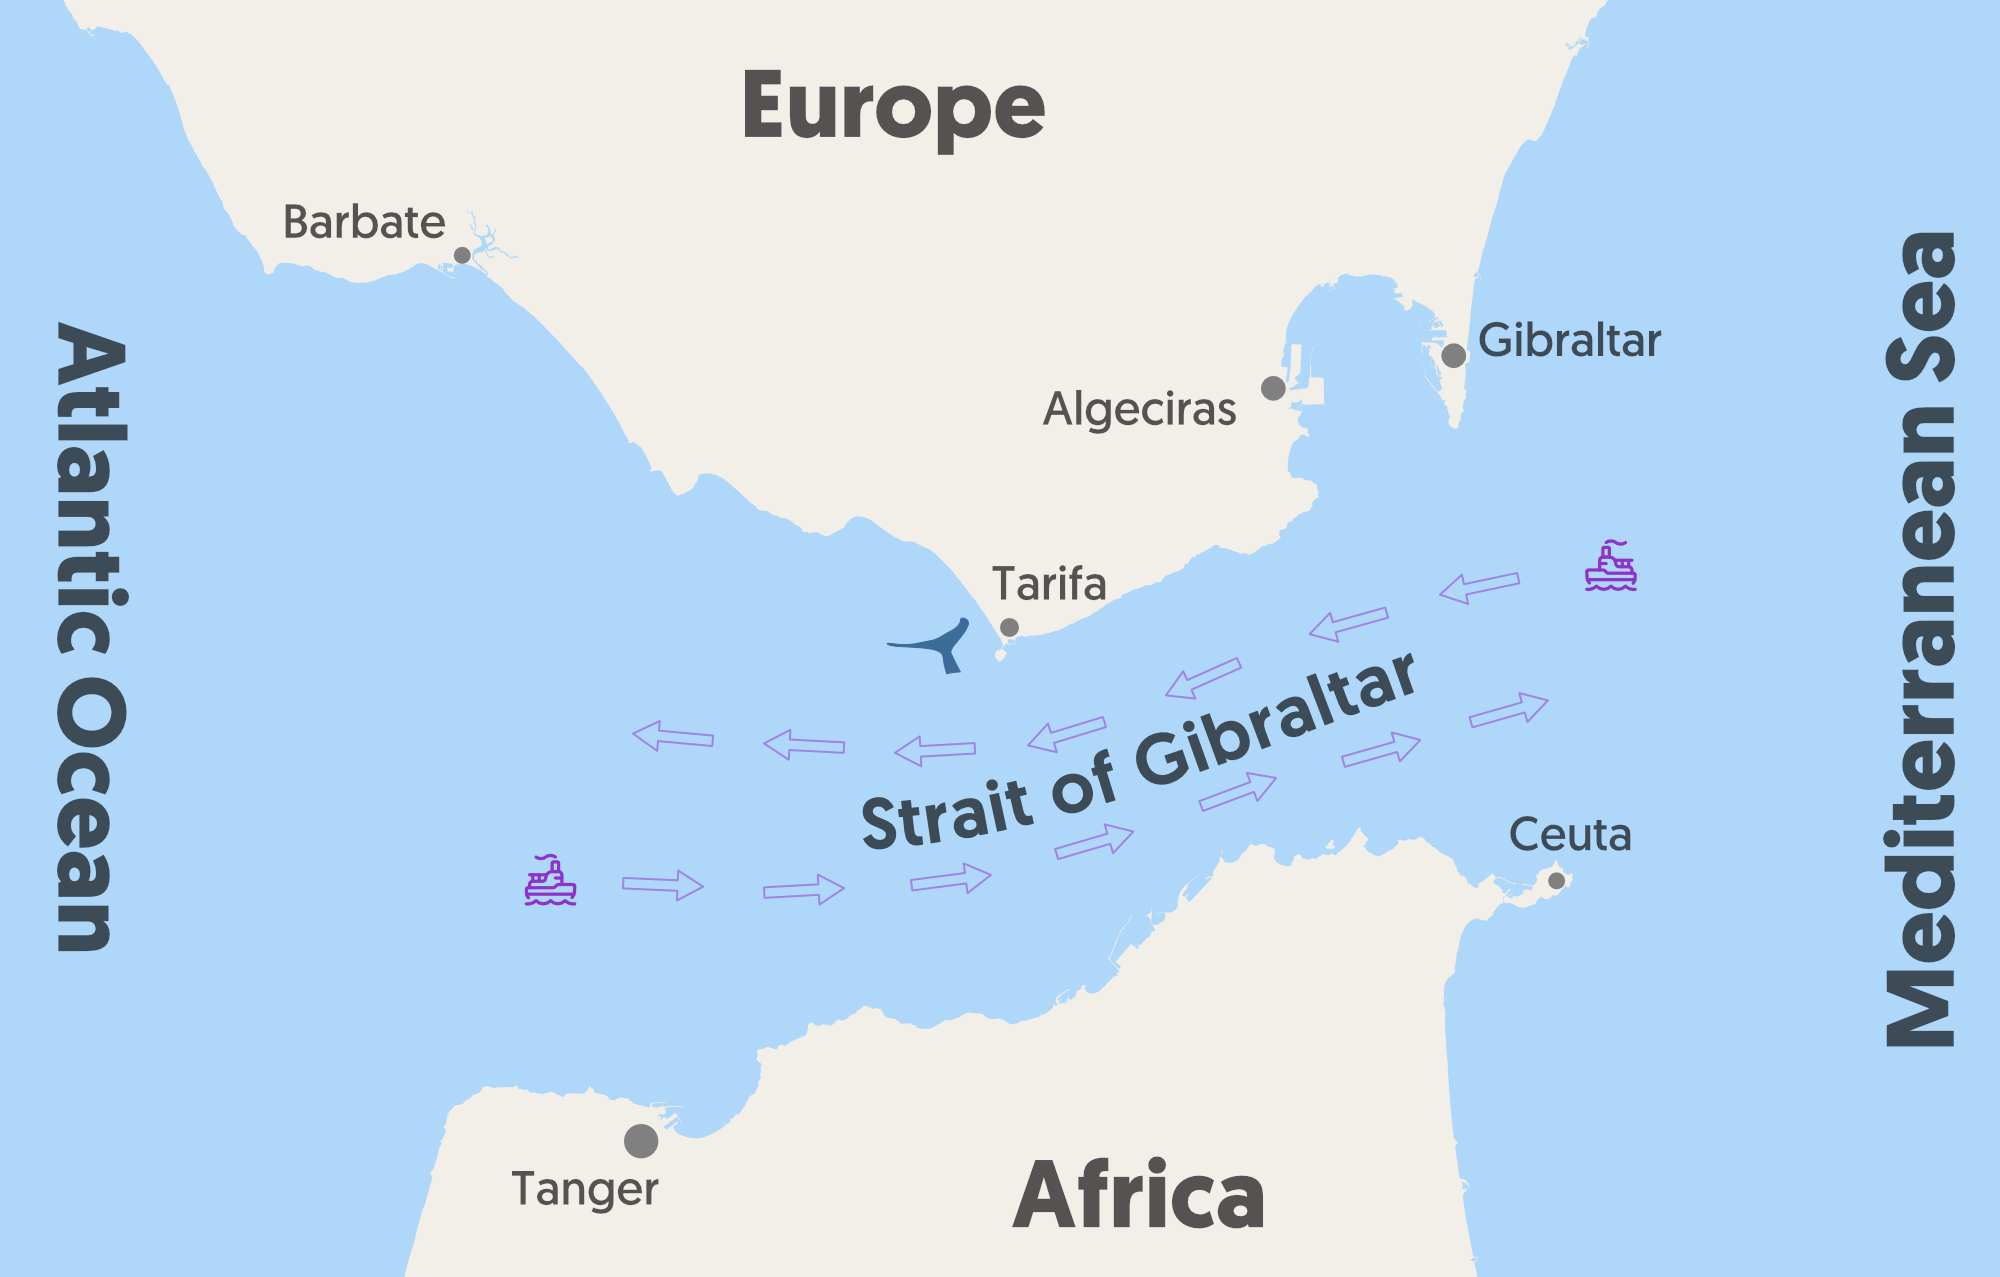 Strait of Gibraltar - Origin and significance